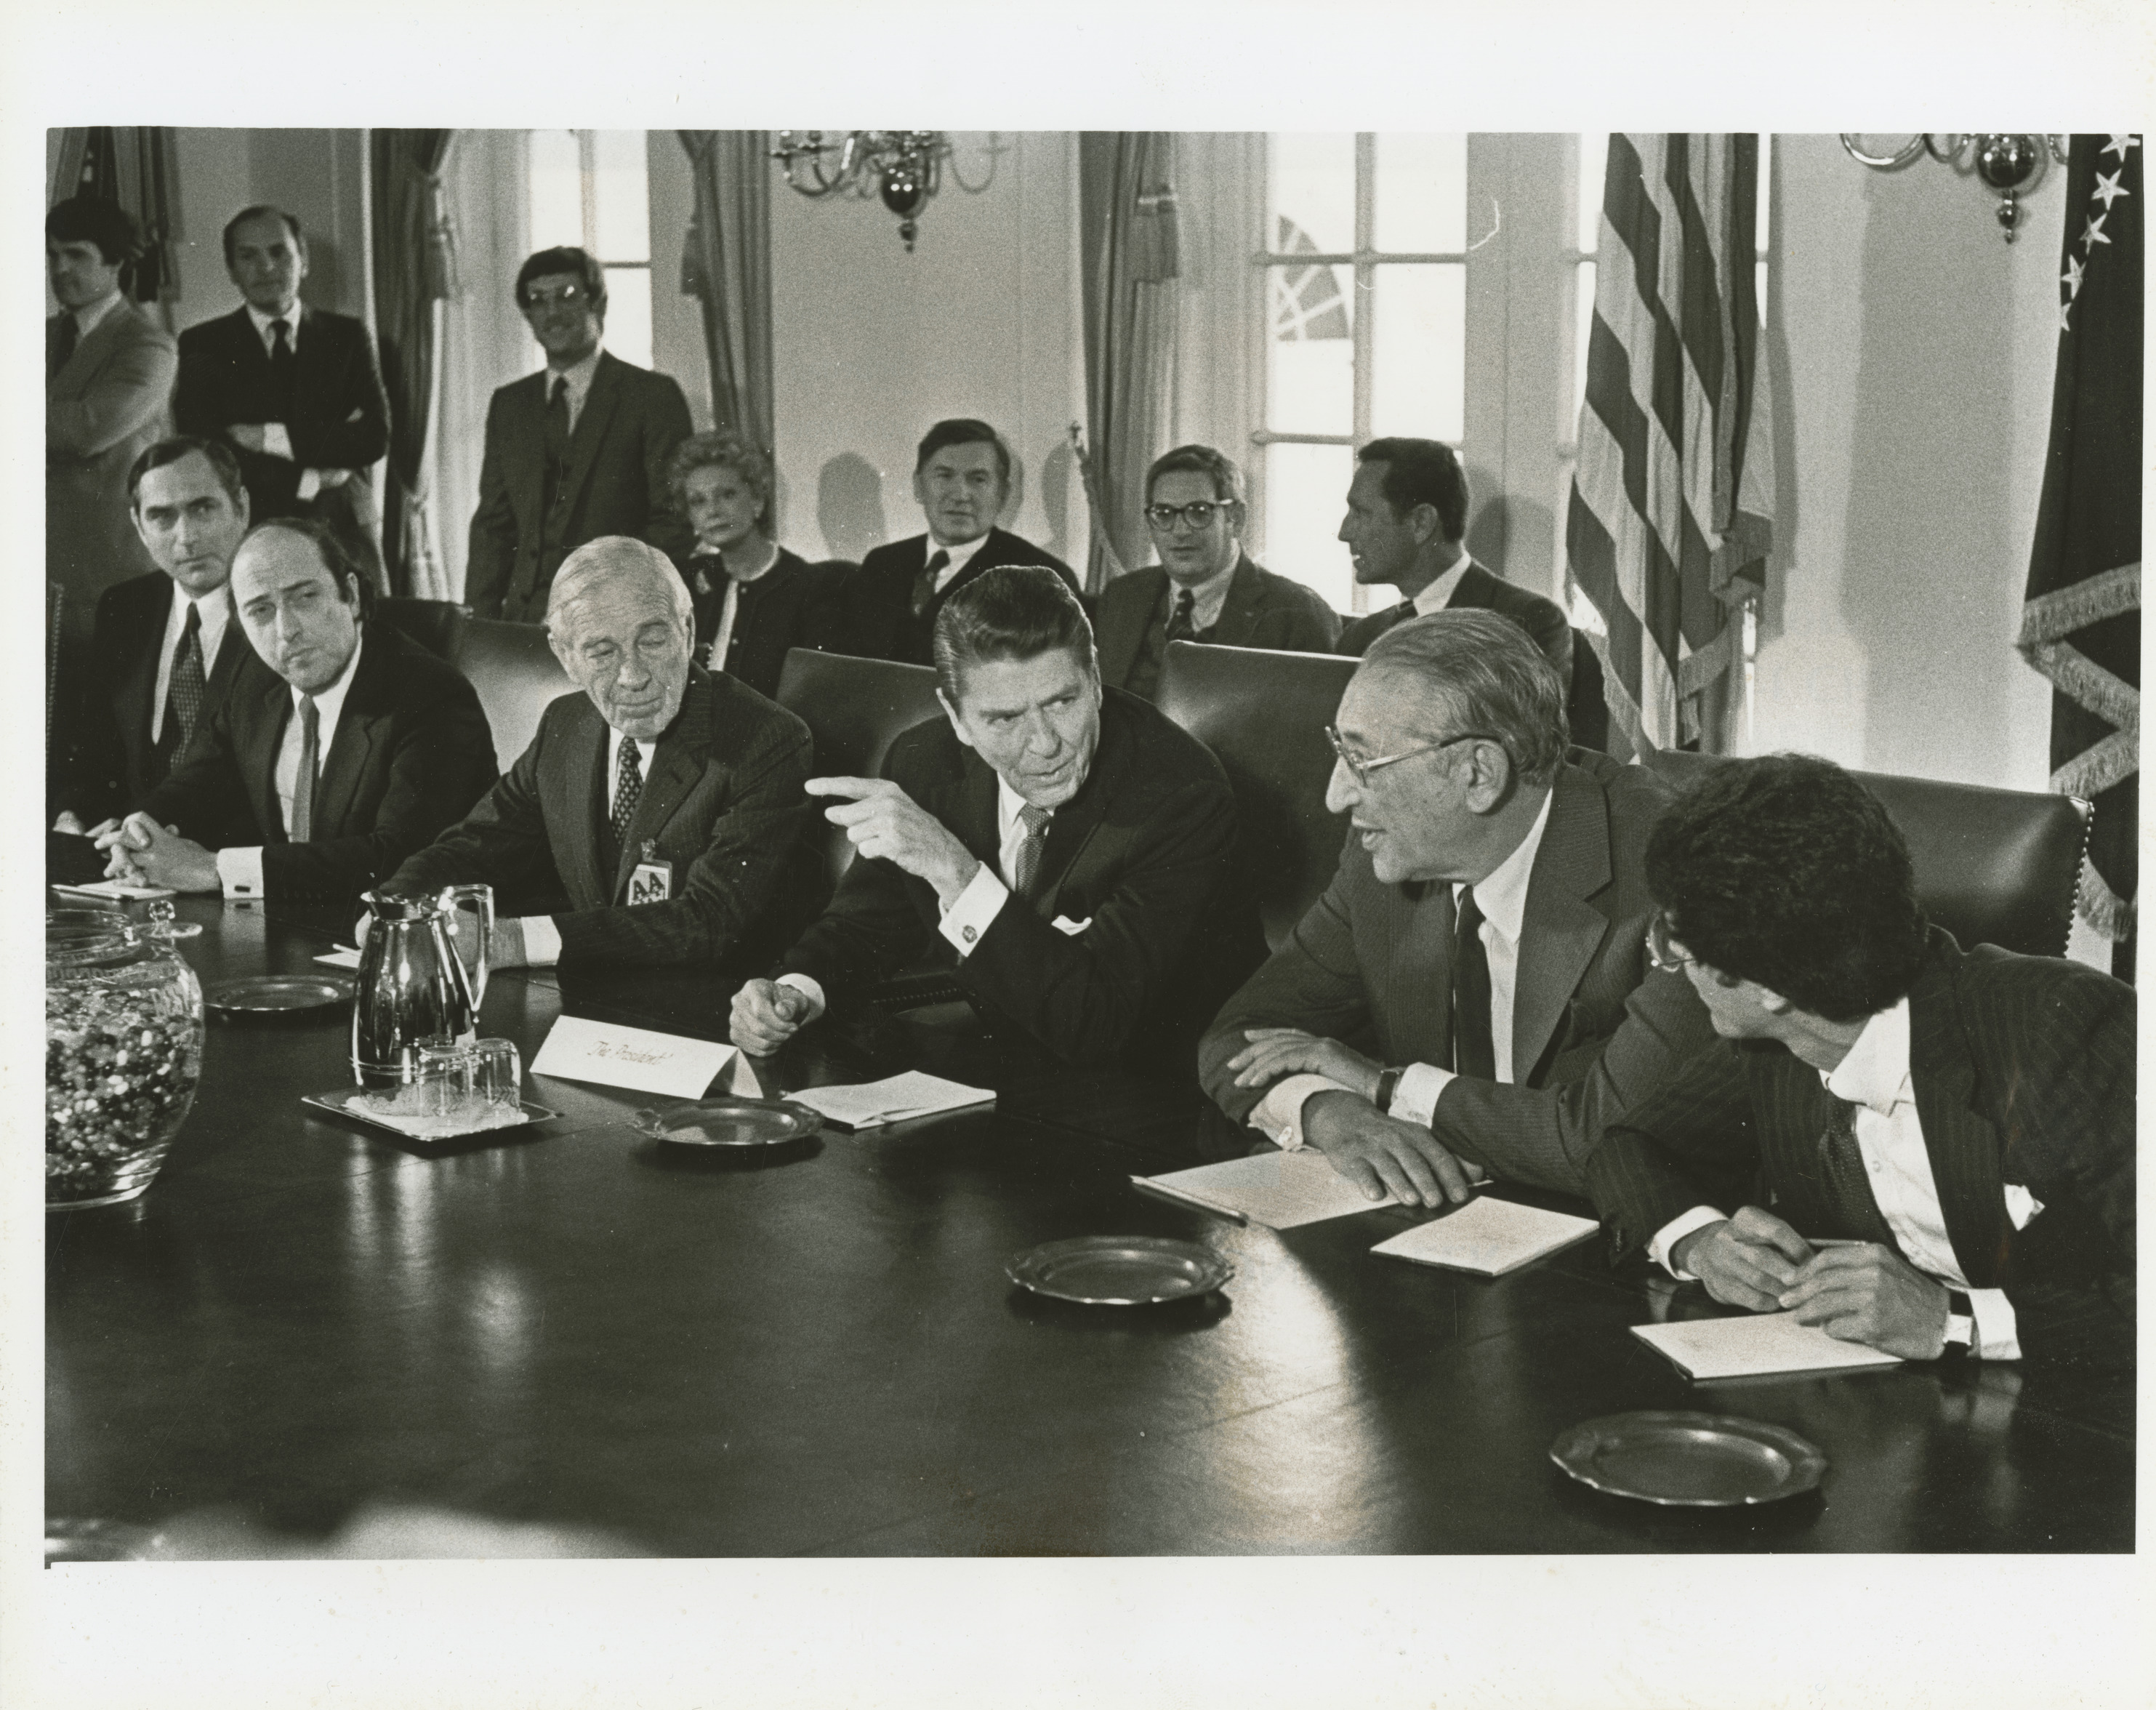 A photo of Gettler in a crowded White House meeting room with President Ronald Reagan and others.